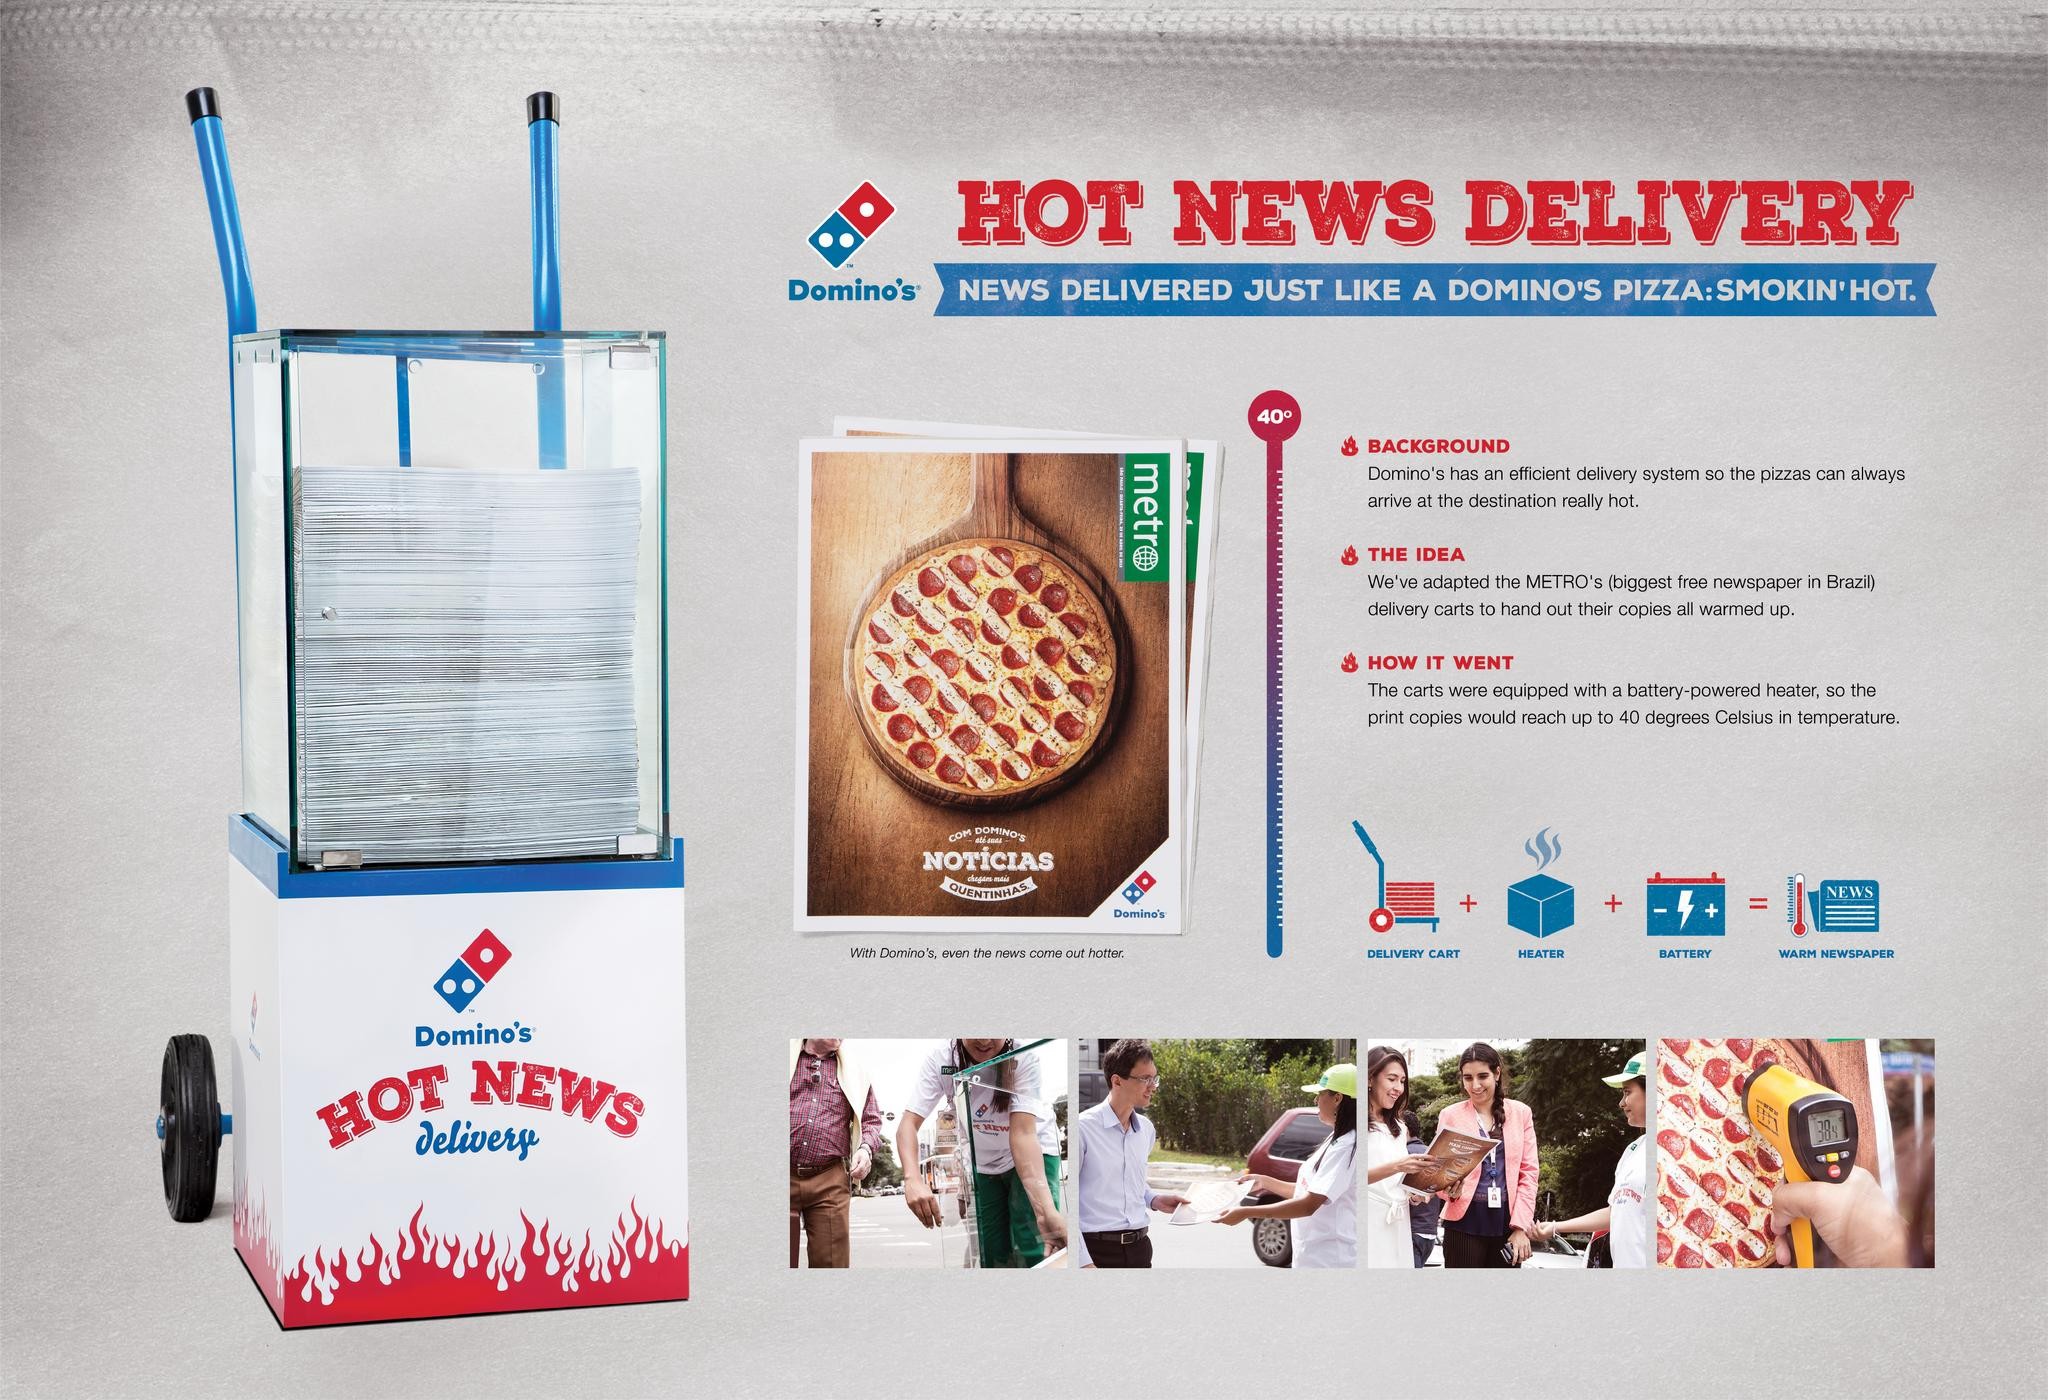 DOMINO'S HOT NEWS DELIVERY